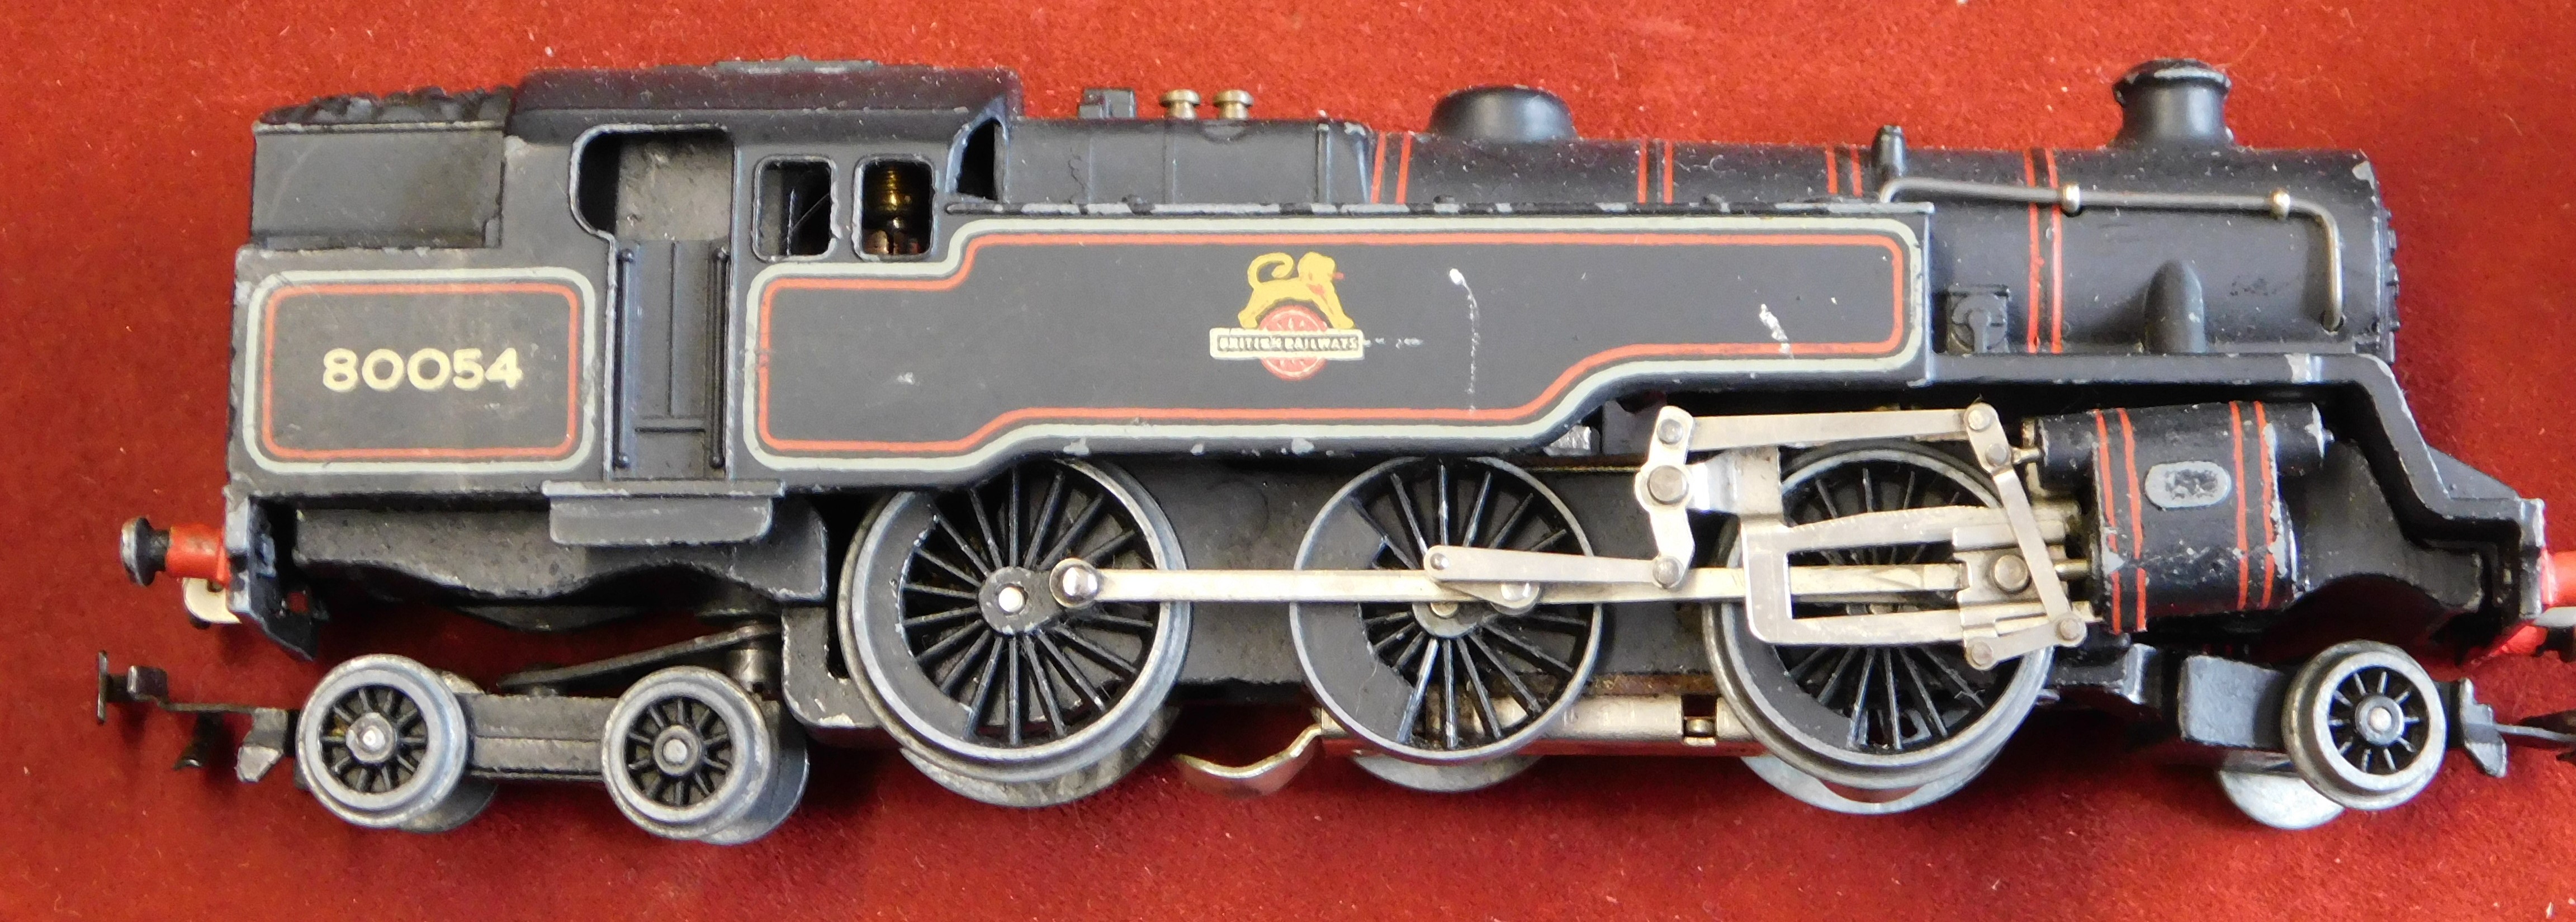 Hornby Dublo 'OO' Gauge 4x various locomotives, 4x various wagons and coaches - Image 6 of 6